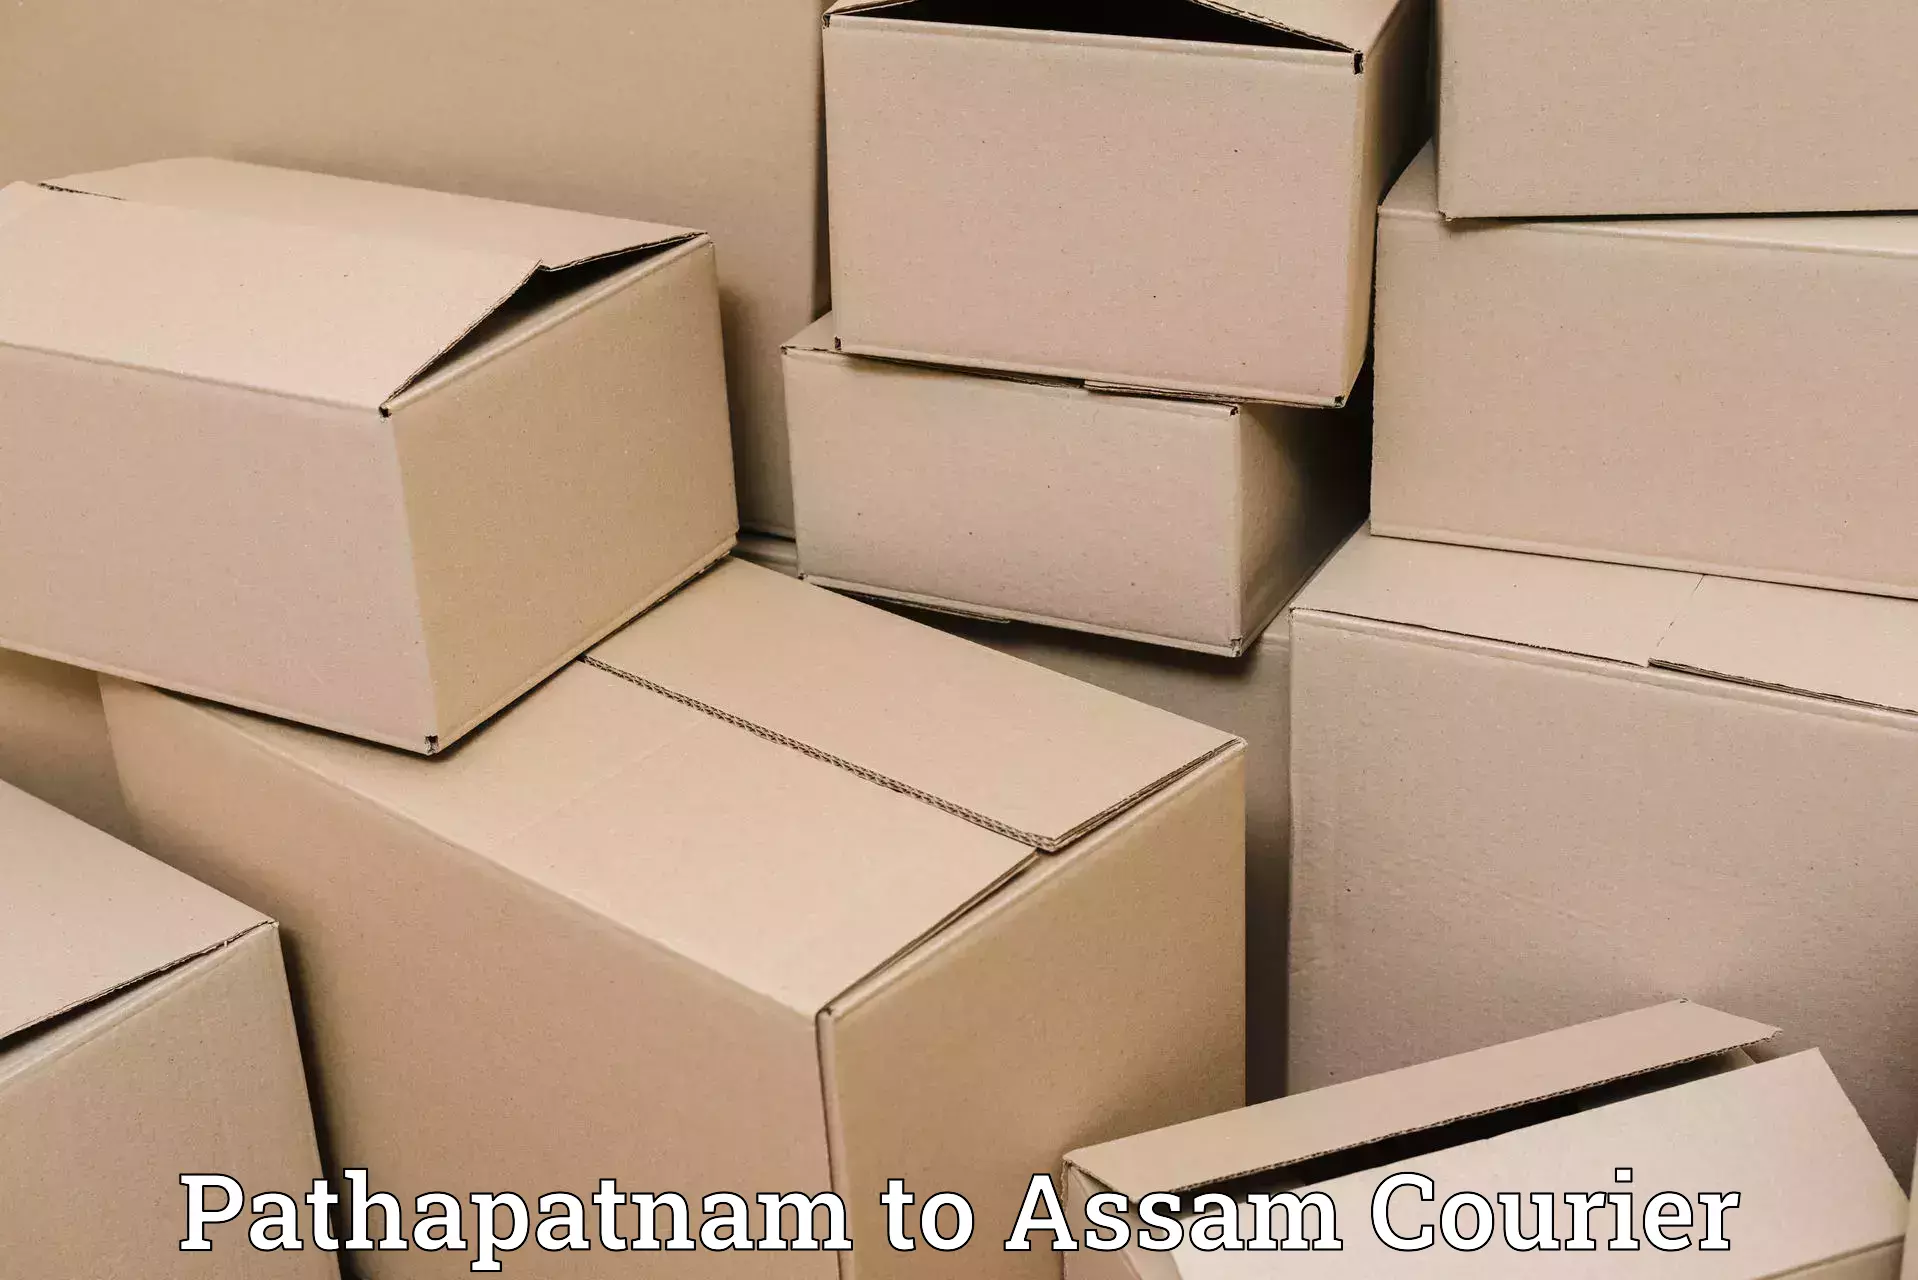 Flexible delivery schedules Pathapatnam to Kamrup